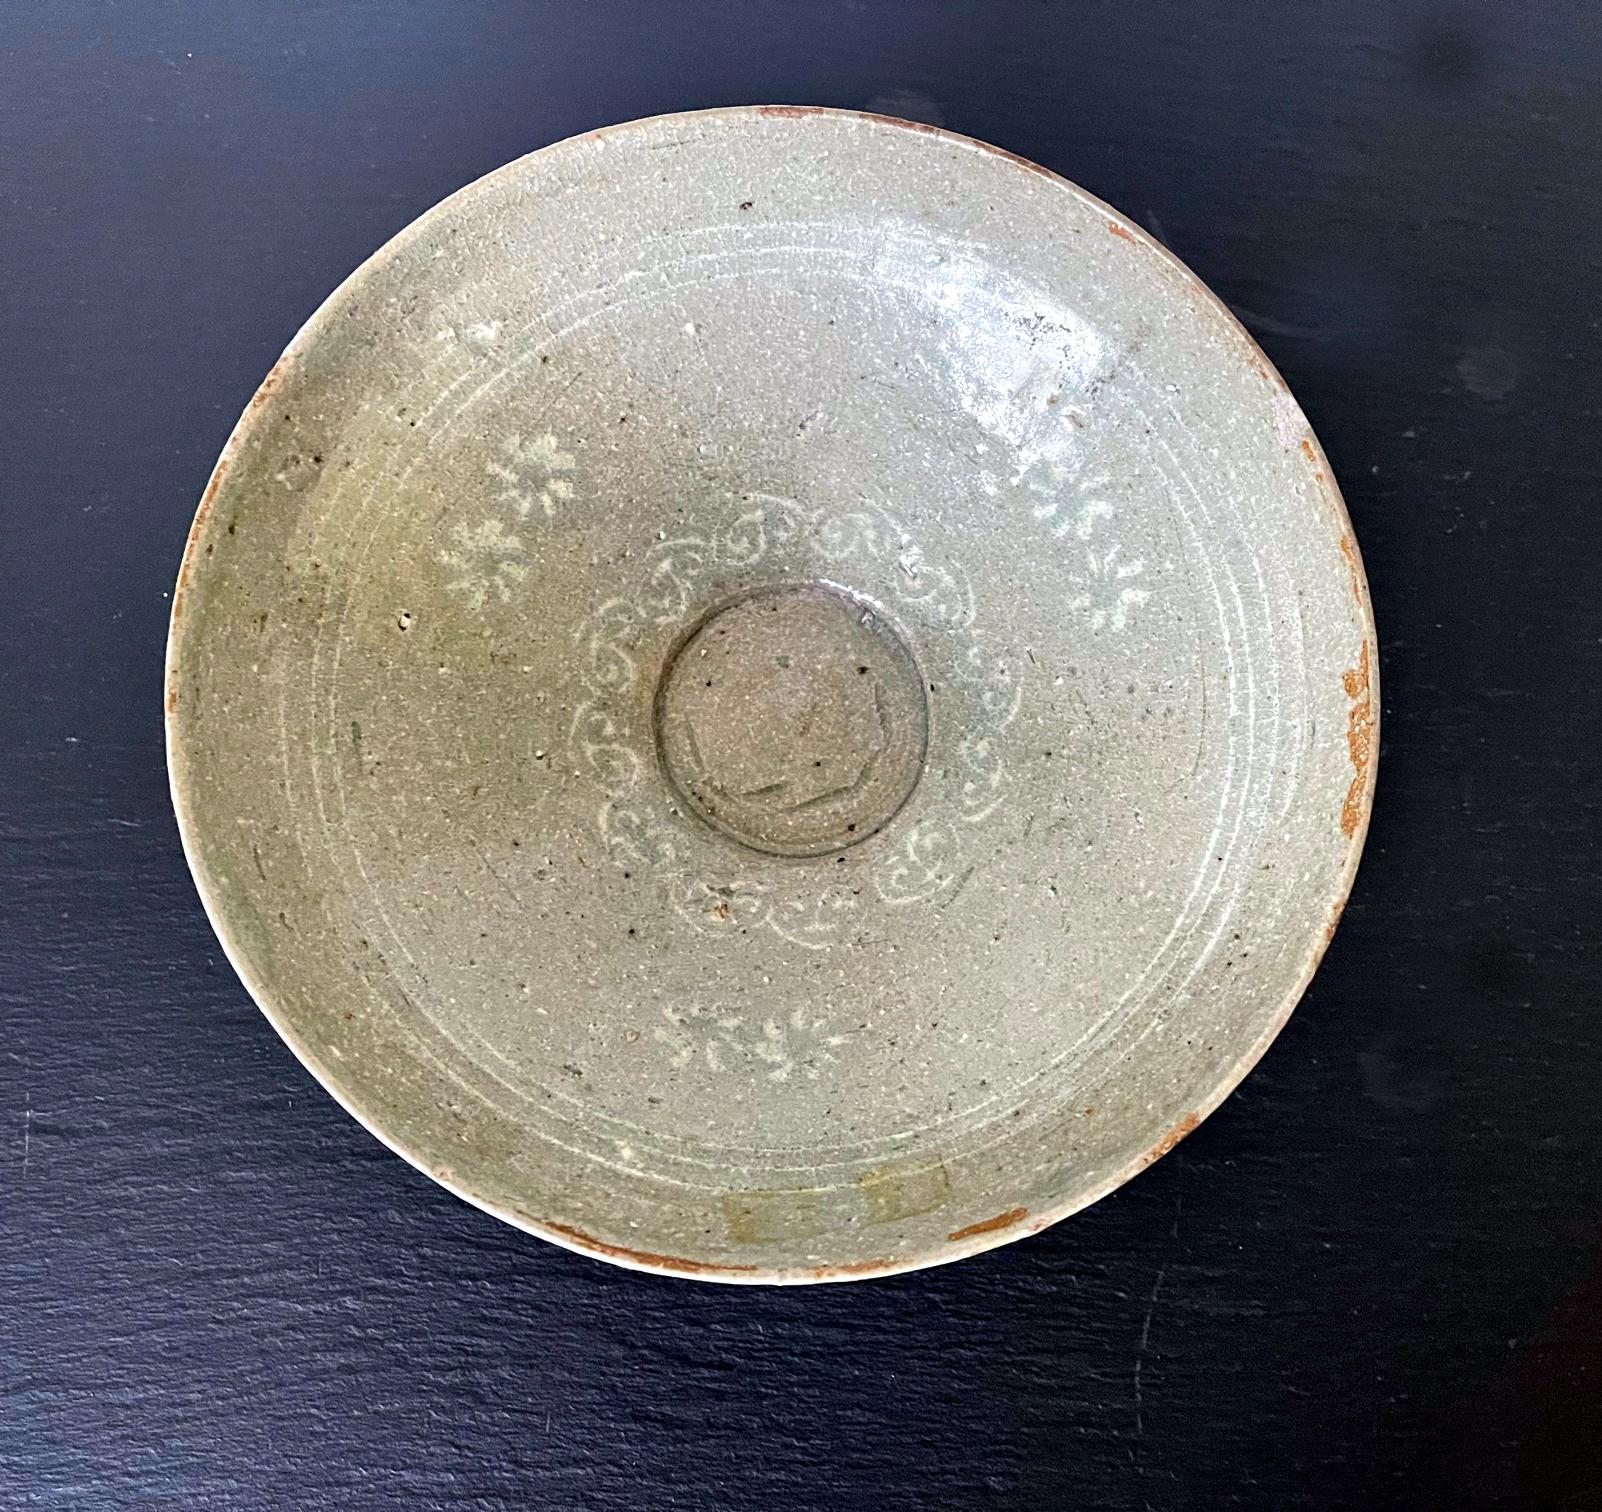 Despite inspired originally by the celadons from Song dynasty in China, the development of celadon in Korean peninsula took its own course and reached the zenith in the 11-12th century during Goryeo dynasty. One singularly distinguishable